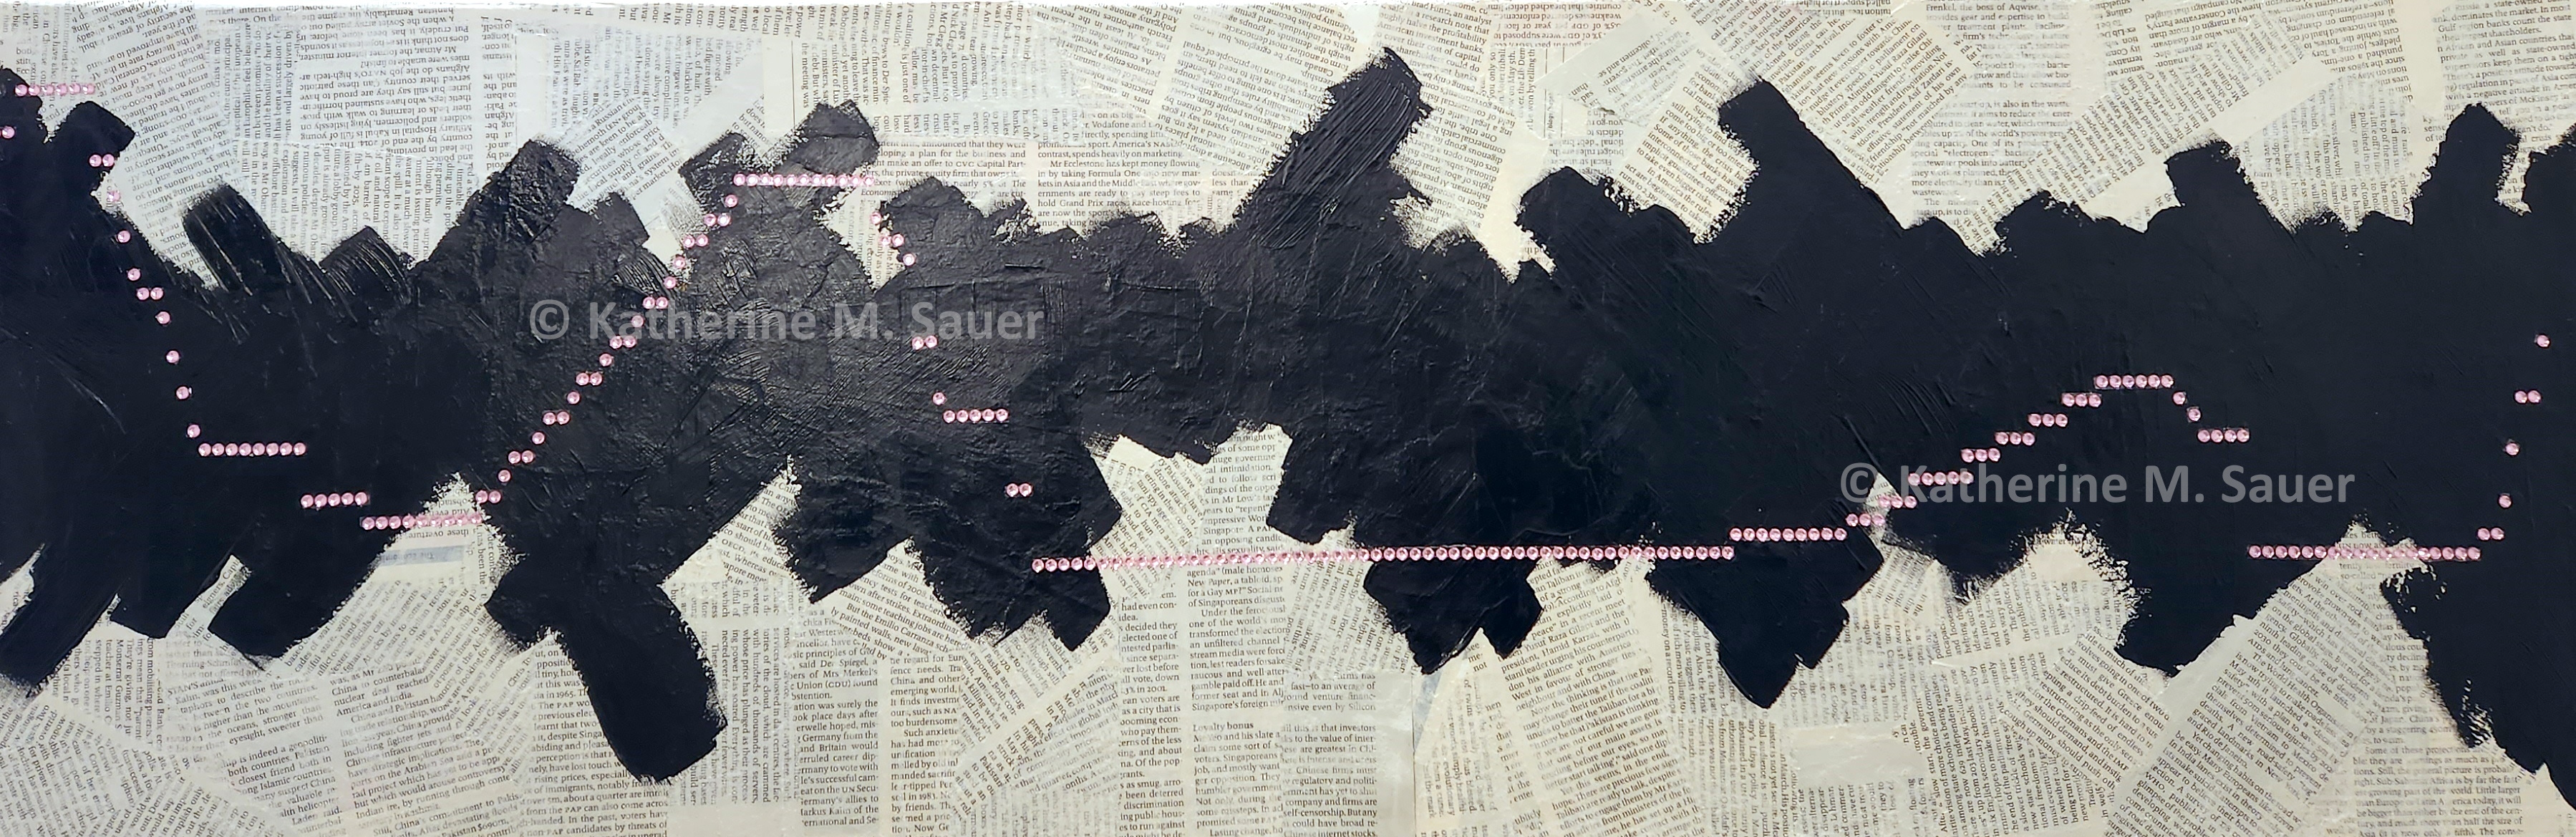 paper mache strips of The Economist magazine, black redacted areas, and pink jewels outlining the federal funds rate